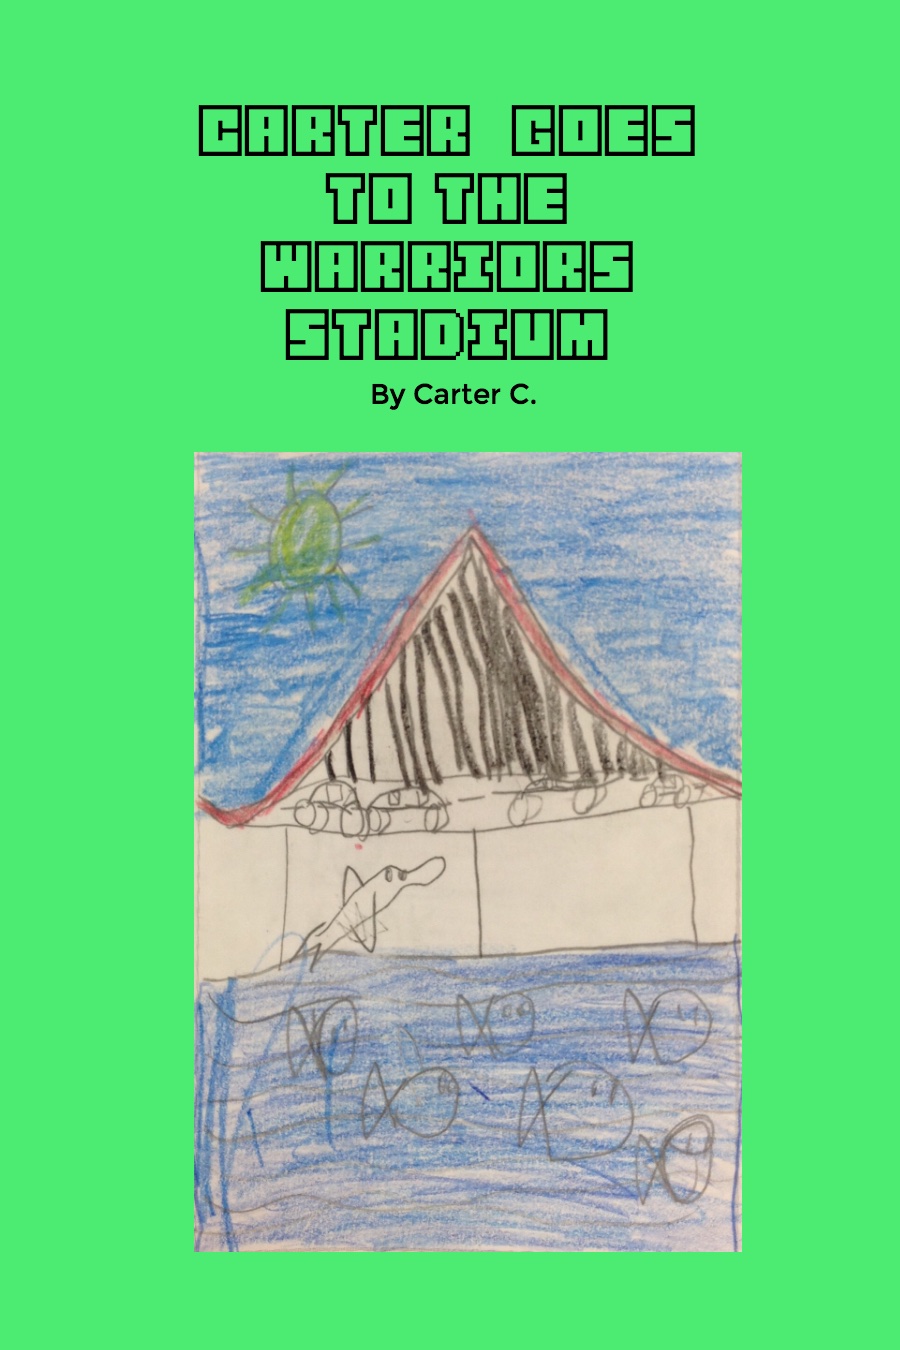 Carter goes to the Warriors Stadum by Carter C